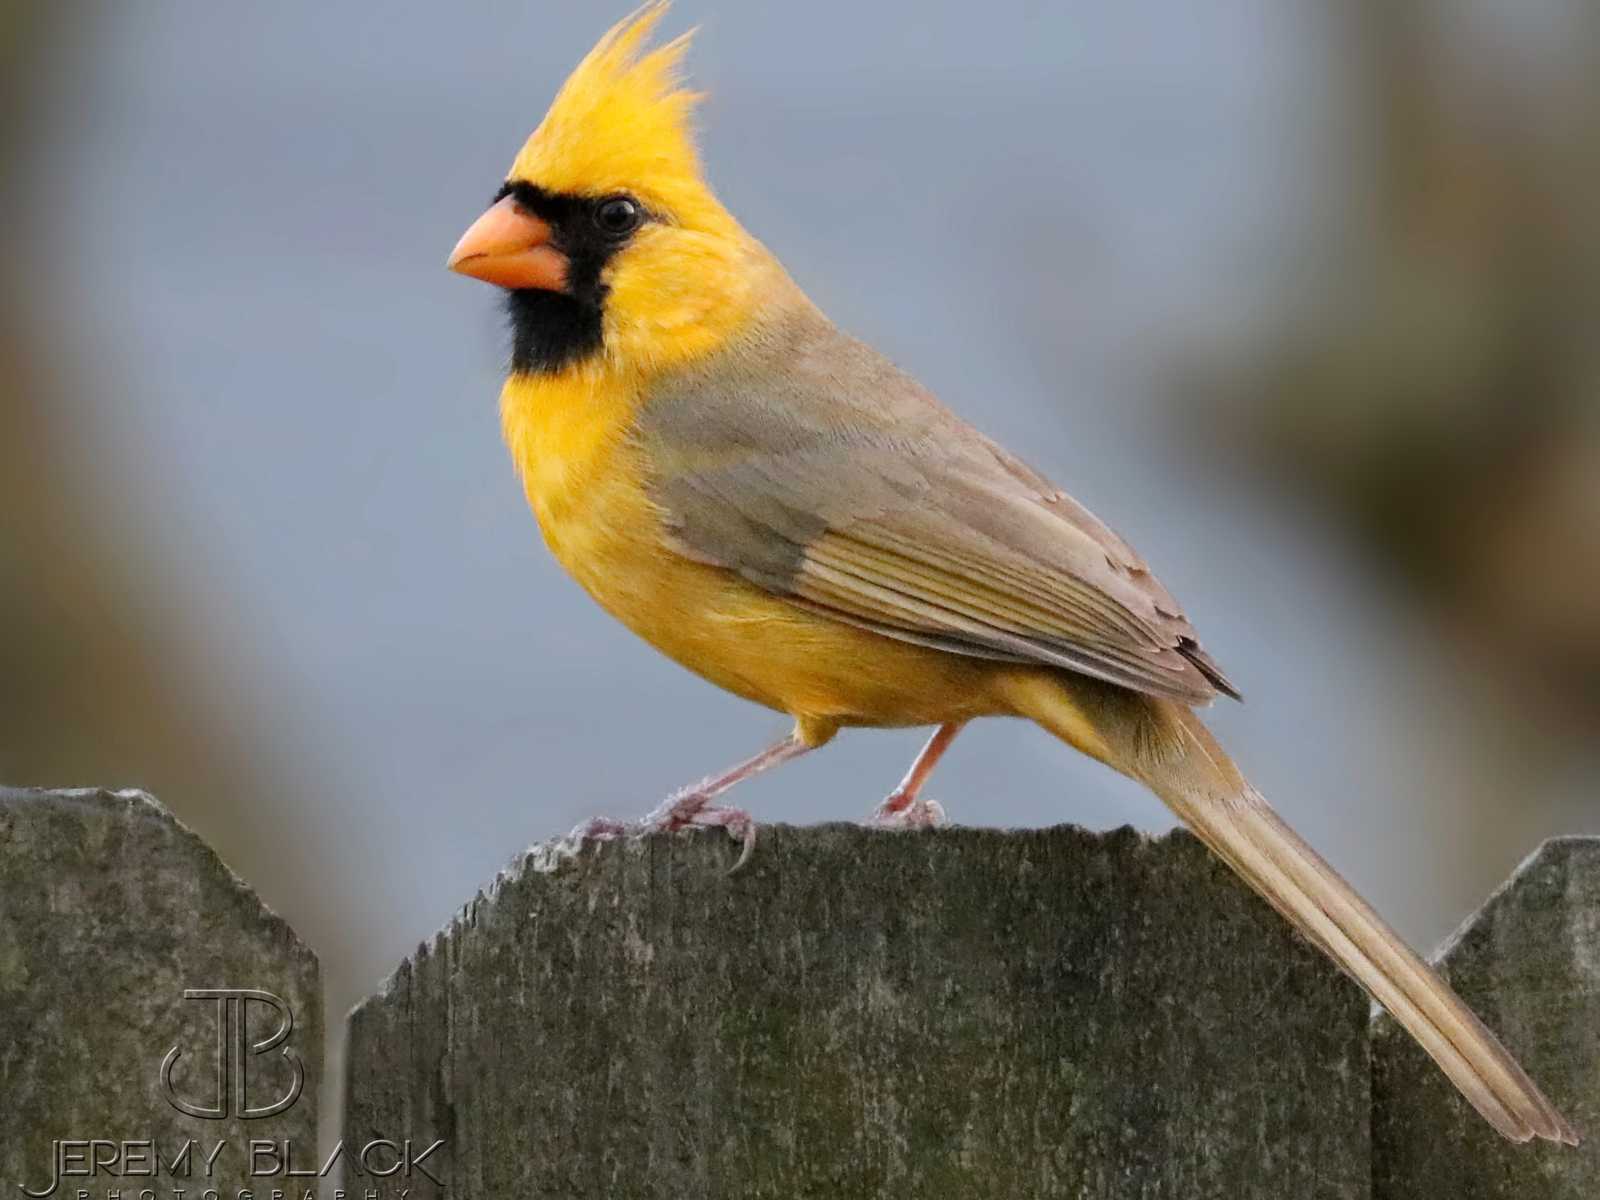 Yellow cardinal sits on top of wooden fence